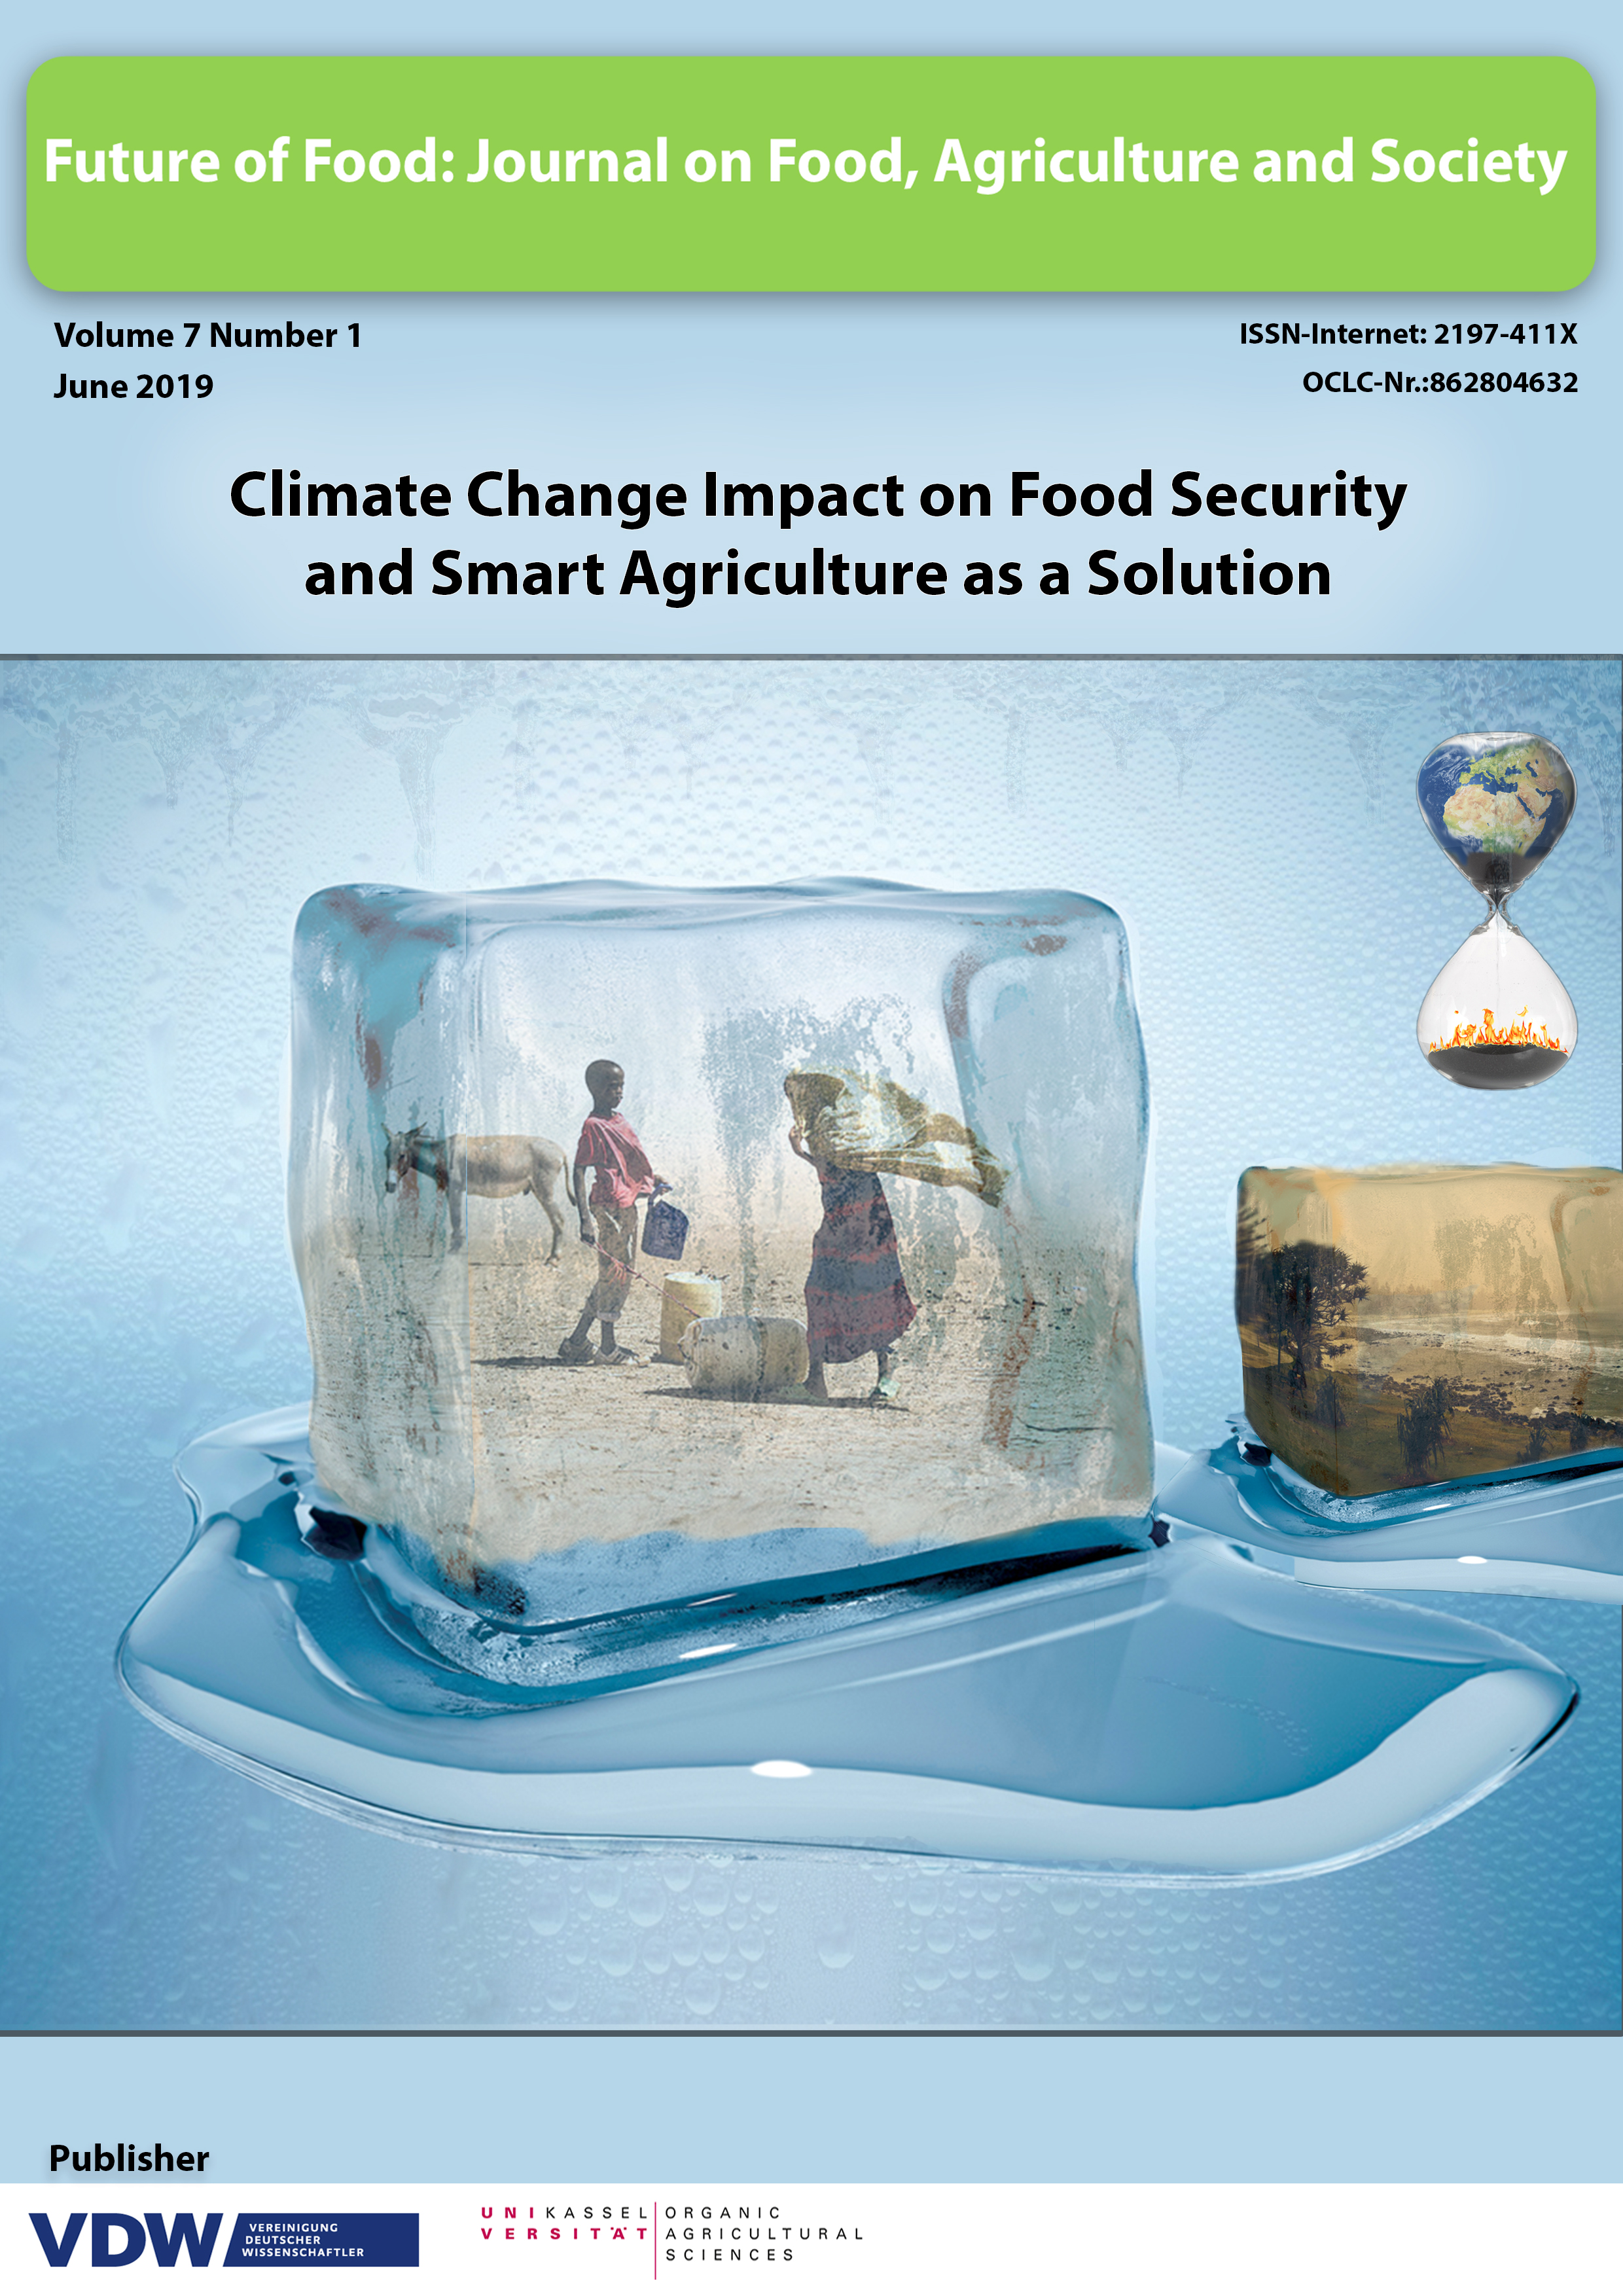 The image shows rural people in a melting icecube under the heading climate change impact on food security and smart agriculture as a solution